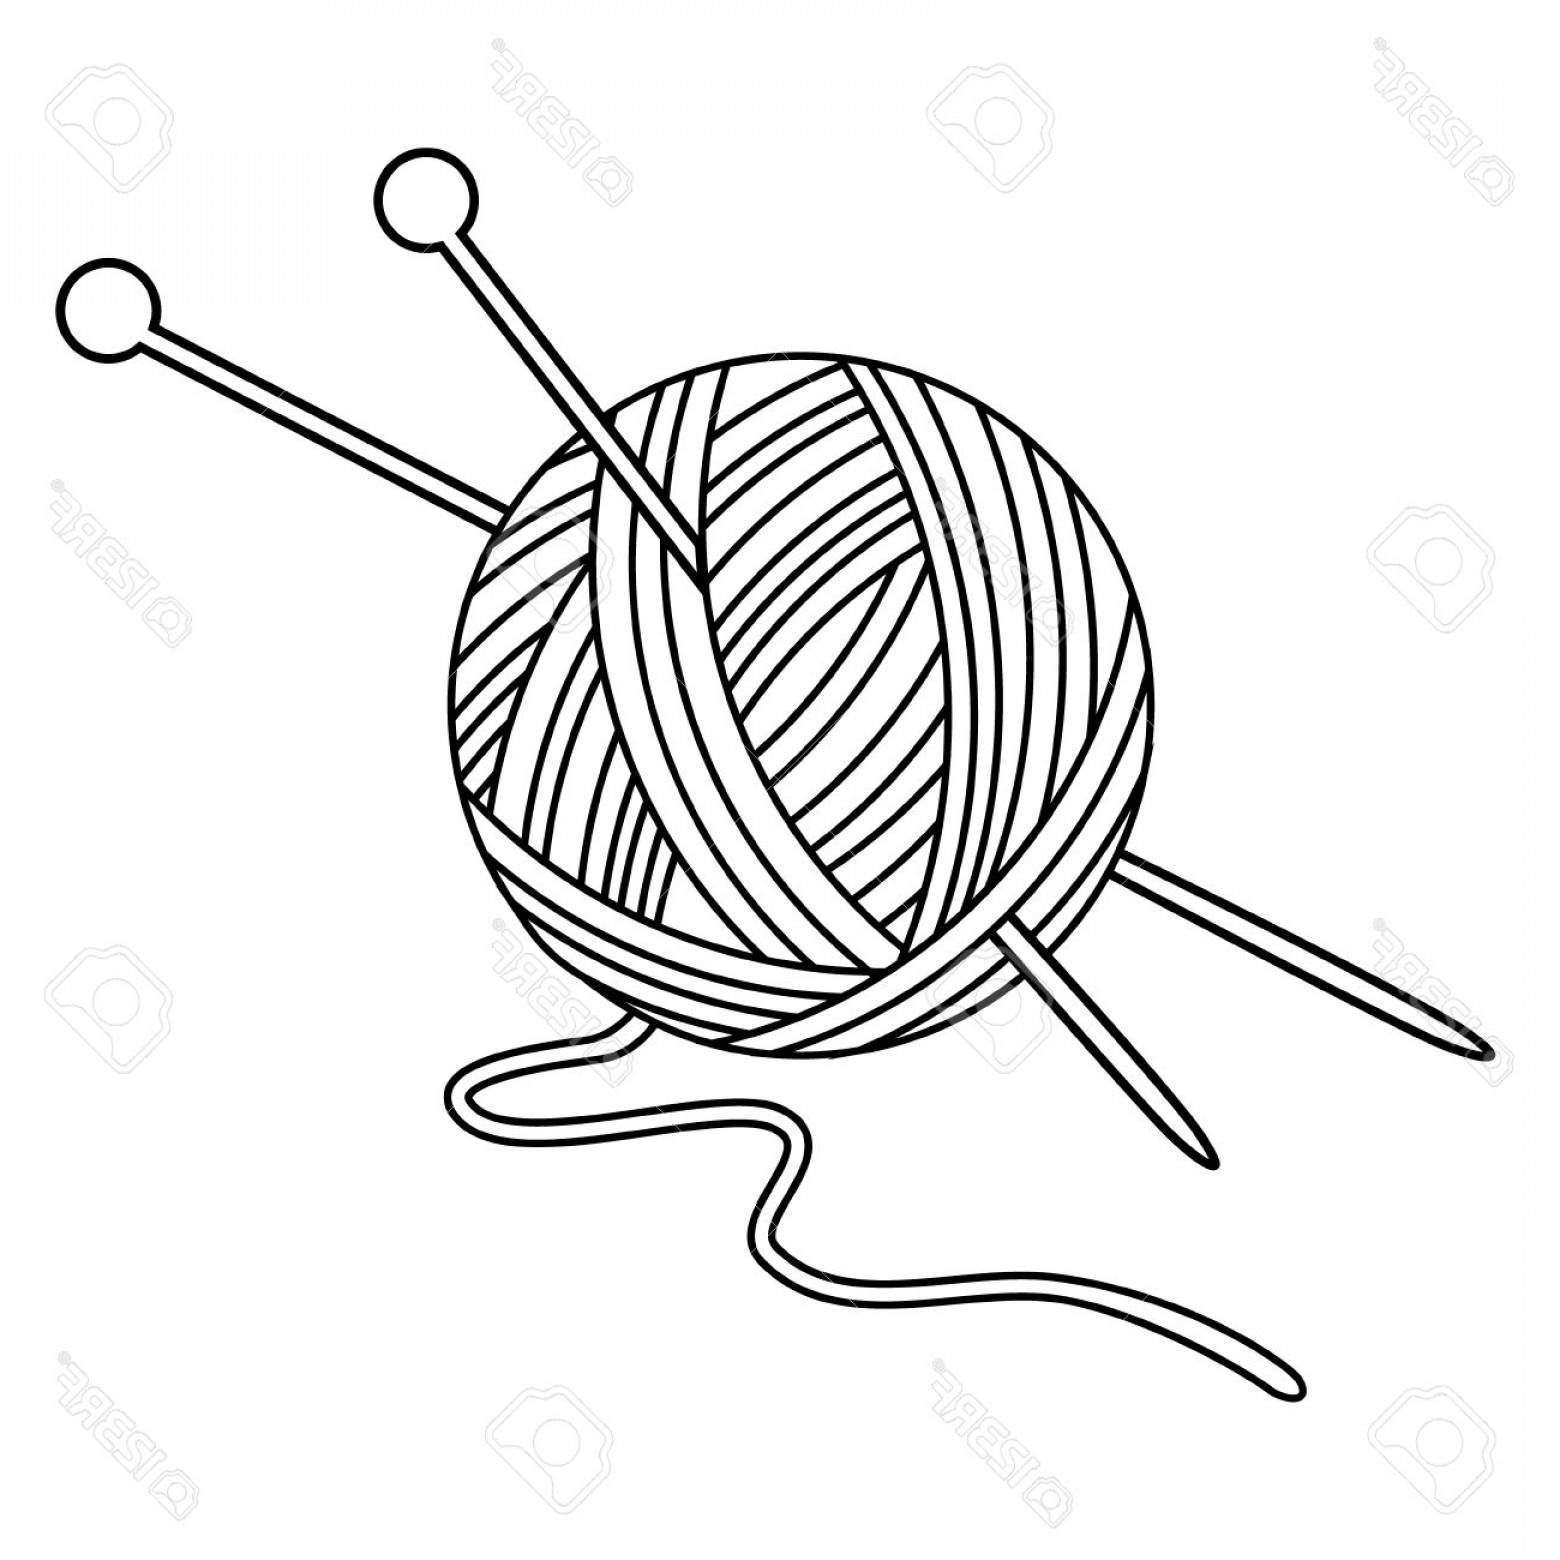 Ball Of Yarn Drawing | Free download on ClipArtMag How To Draw A Ball Of Yarn